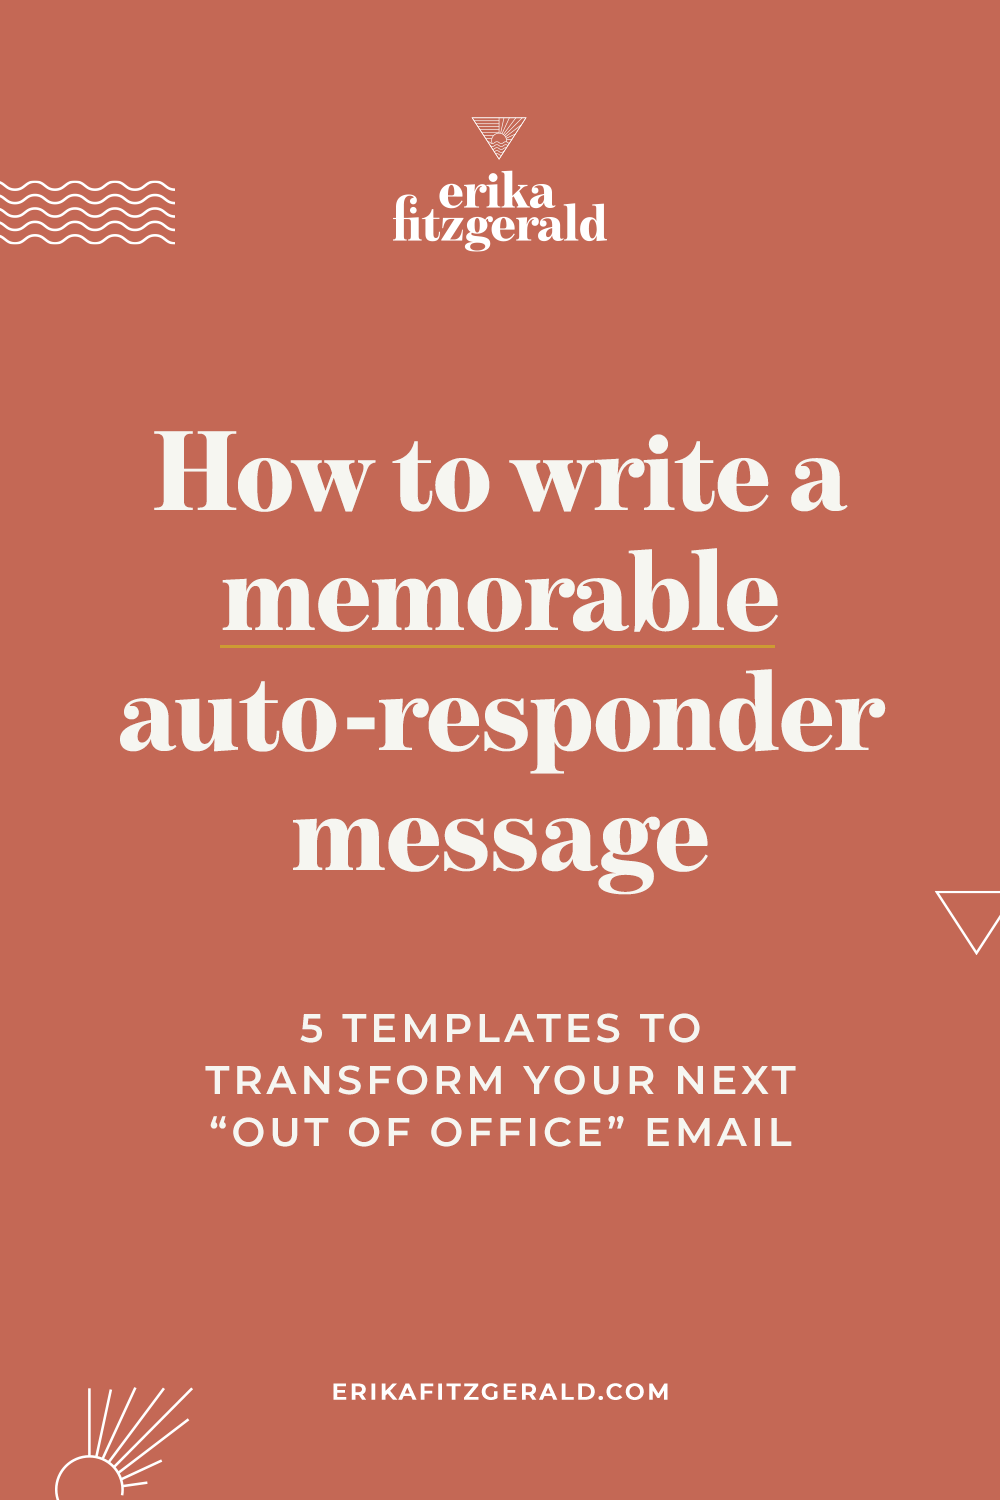 How to write an out of office email message